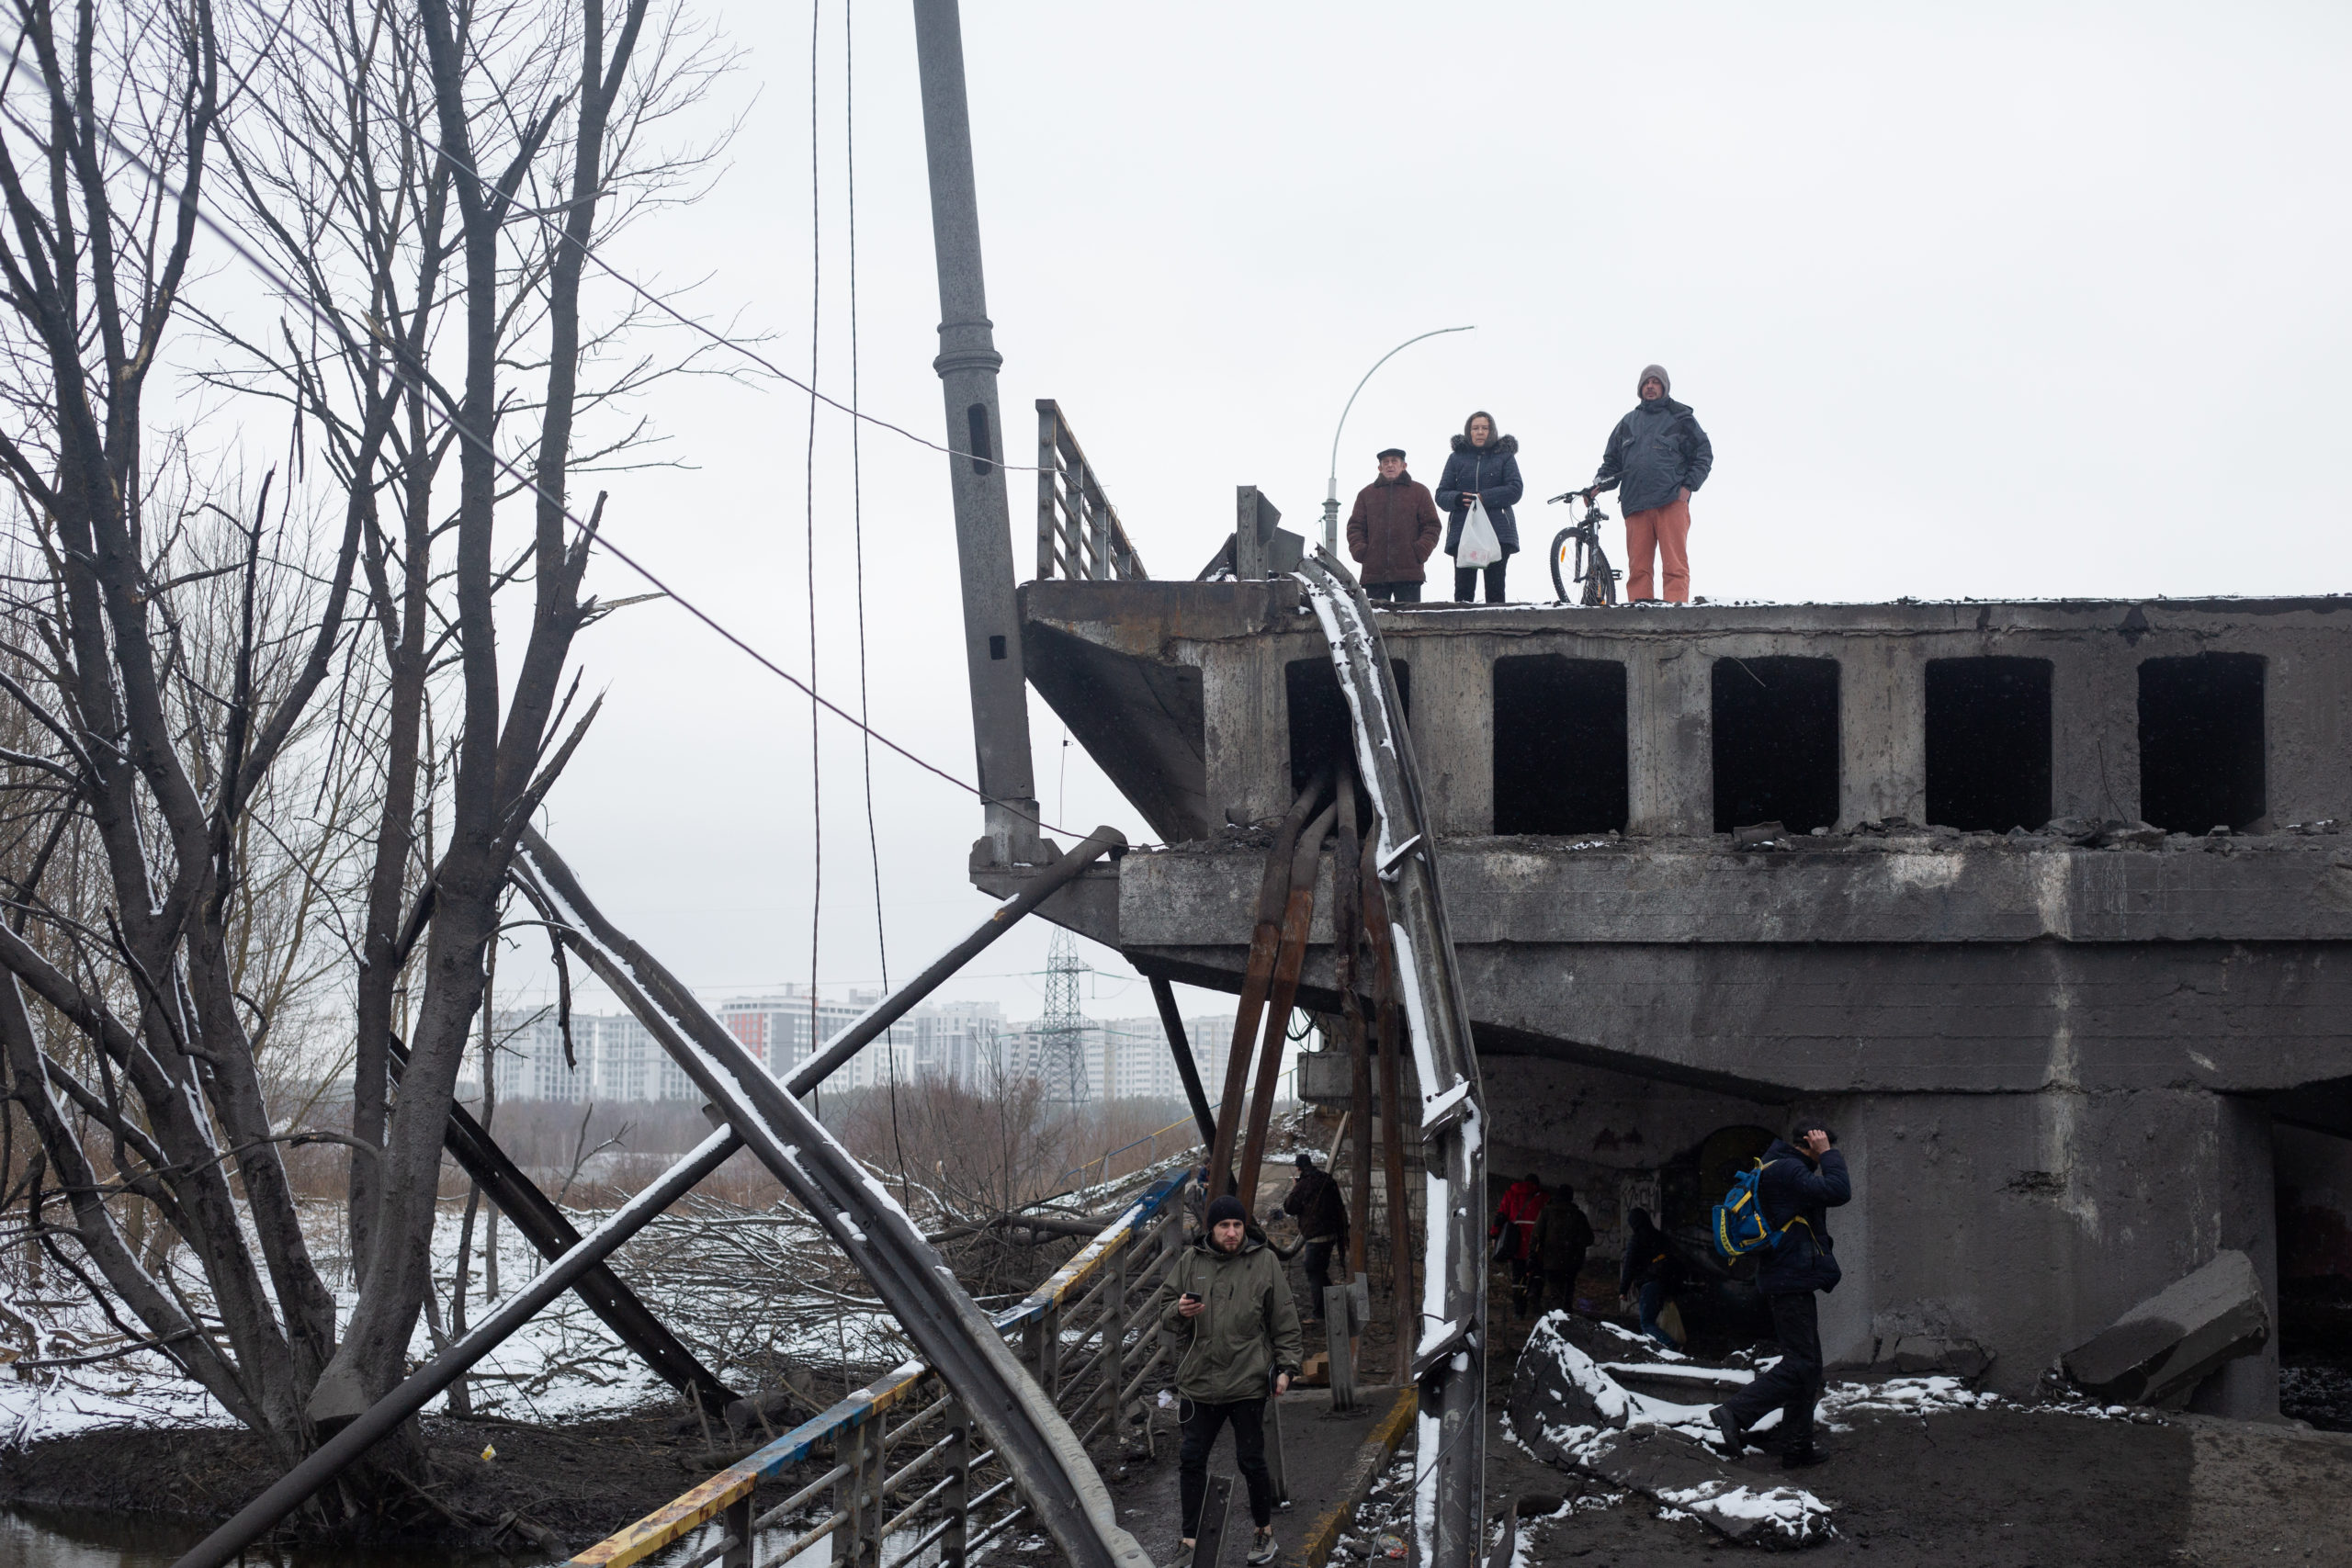 IRPIN, UKRAINE - MARCH 1: A view of a destroyed bridge on March 1, 2022 in Irpin, Ukraine. Russian forces continued to advance on the Ukrainian capital of Kyiv as their invasion of its western neighbor entered its sixth day. Intense battles also continue in Ukraine's other major cities. (Photo by Anastasia Vlasova/Getty Images)